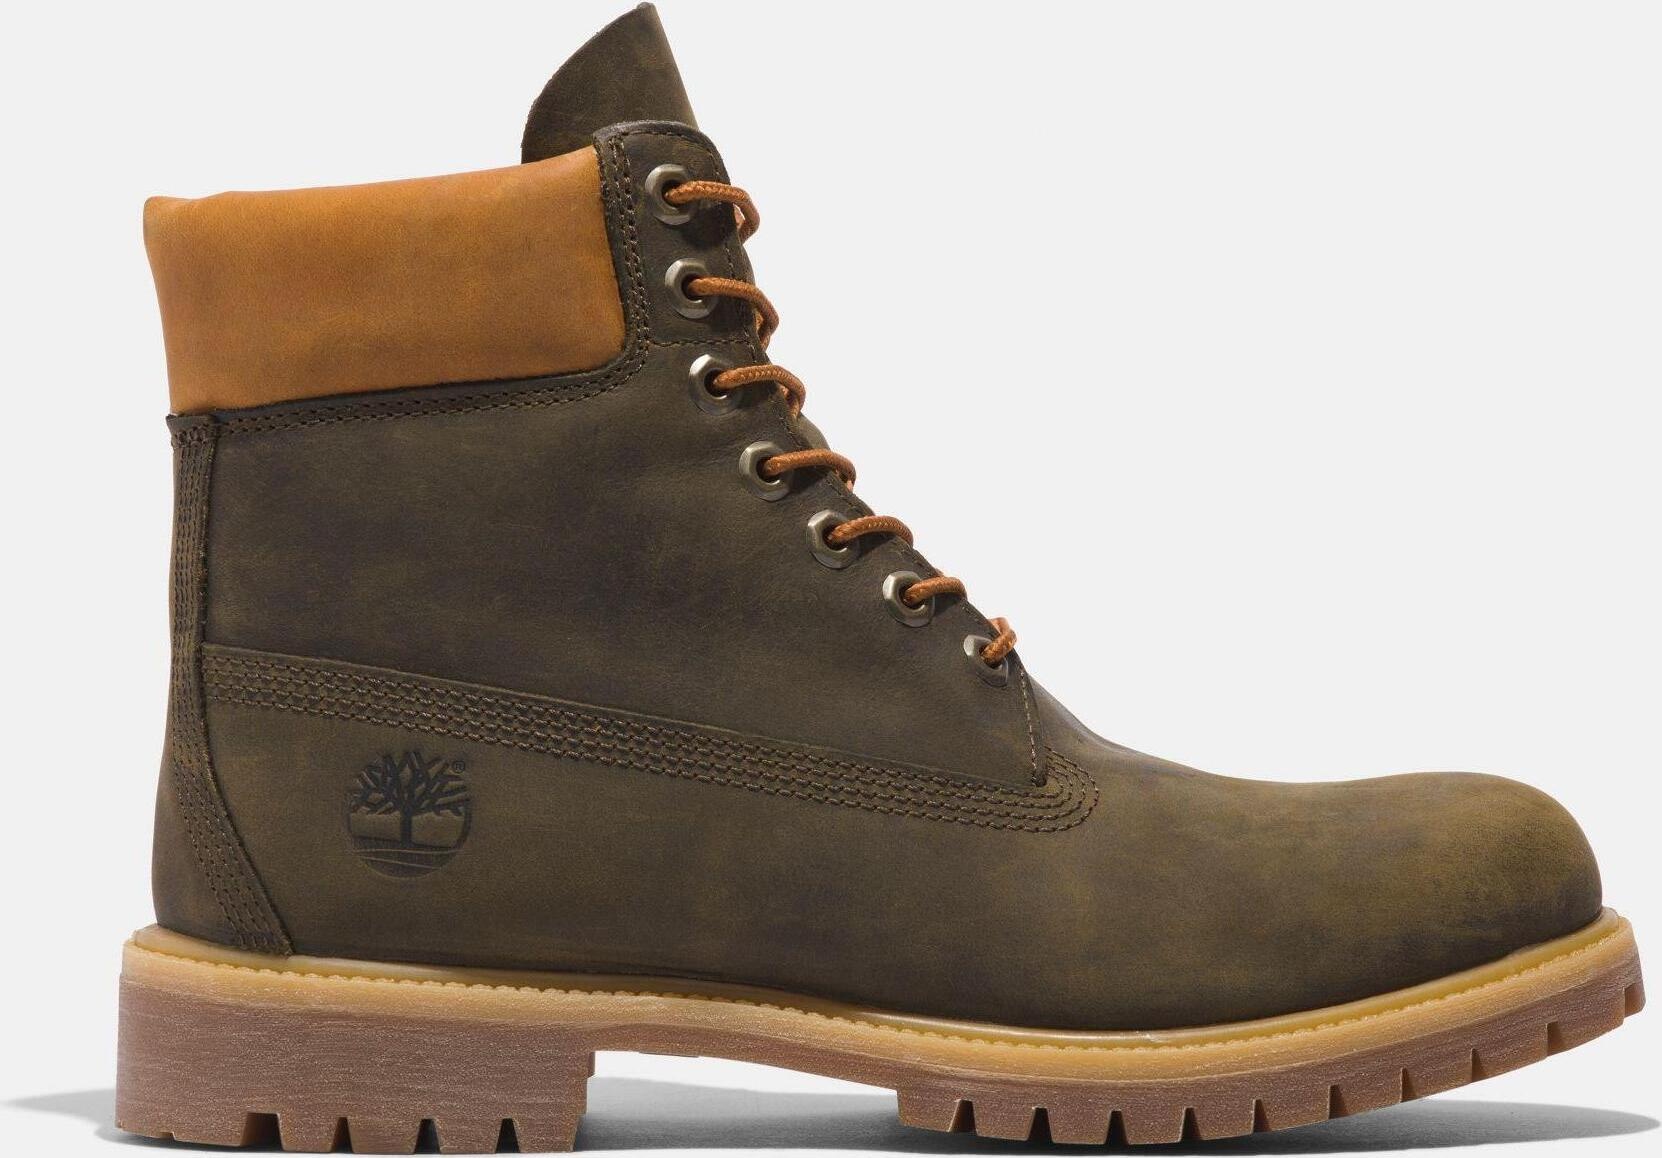 Timberland Mens 6 Inch Premium Boot military olive 8 Wide Fit